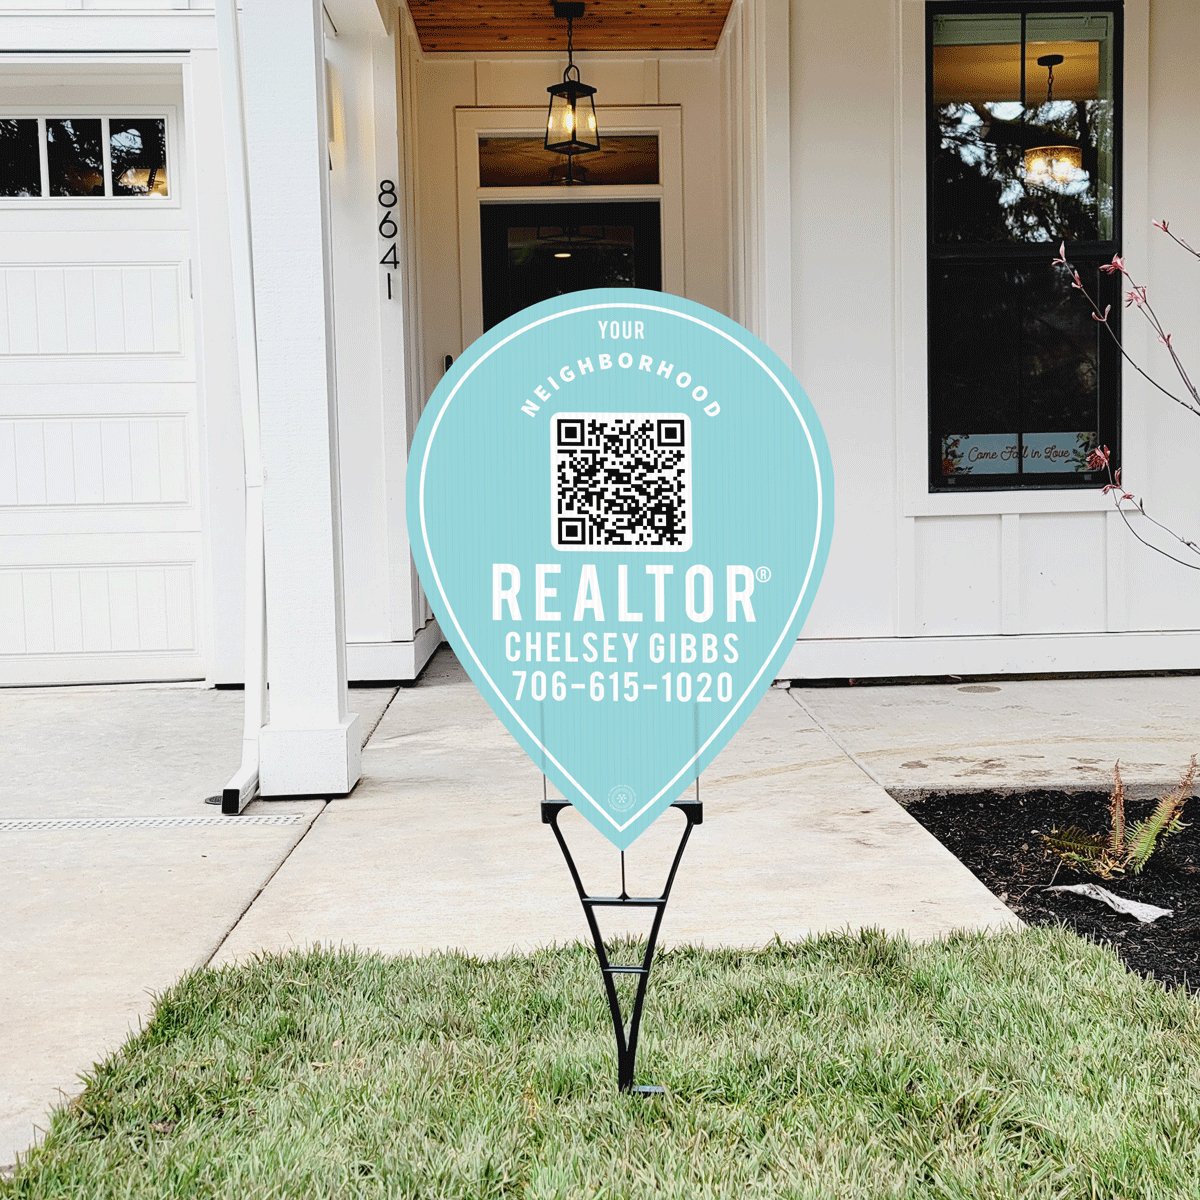 Personalized Neighborhood Agent Map Pin - All Things Real Estate